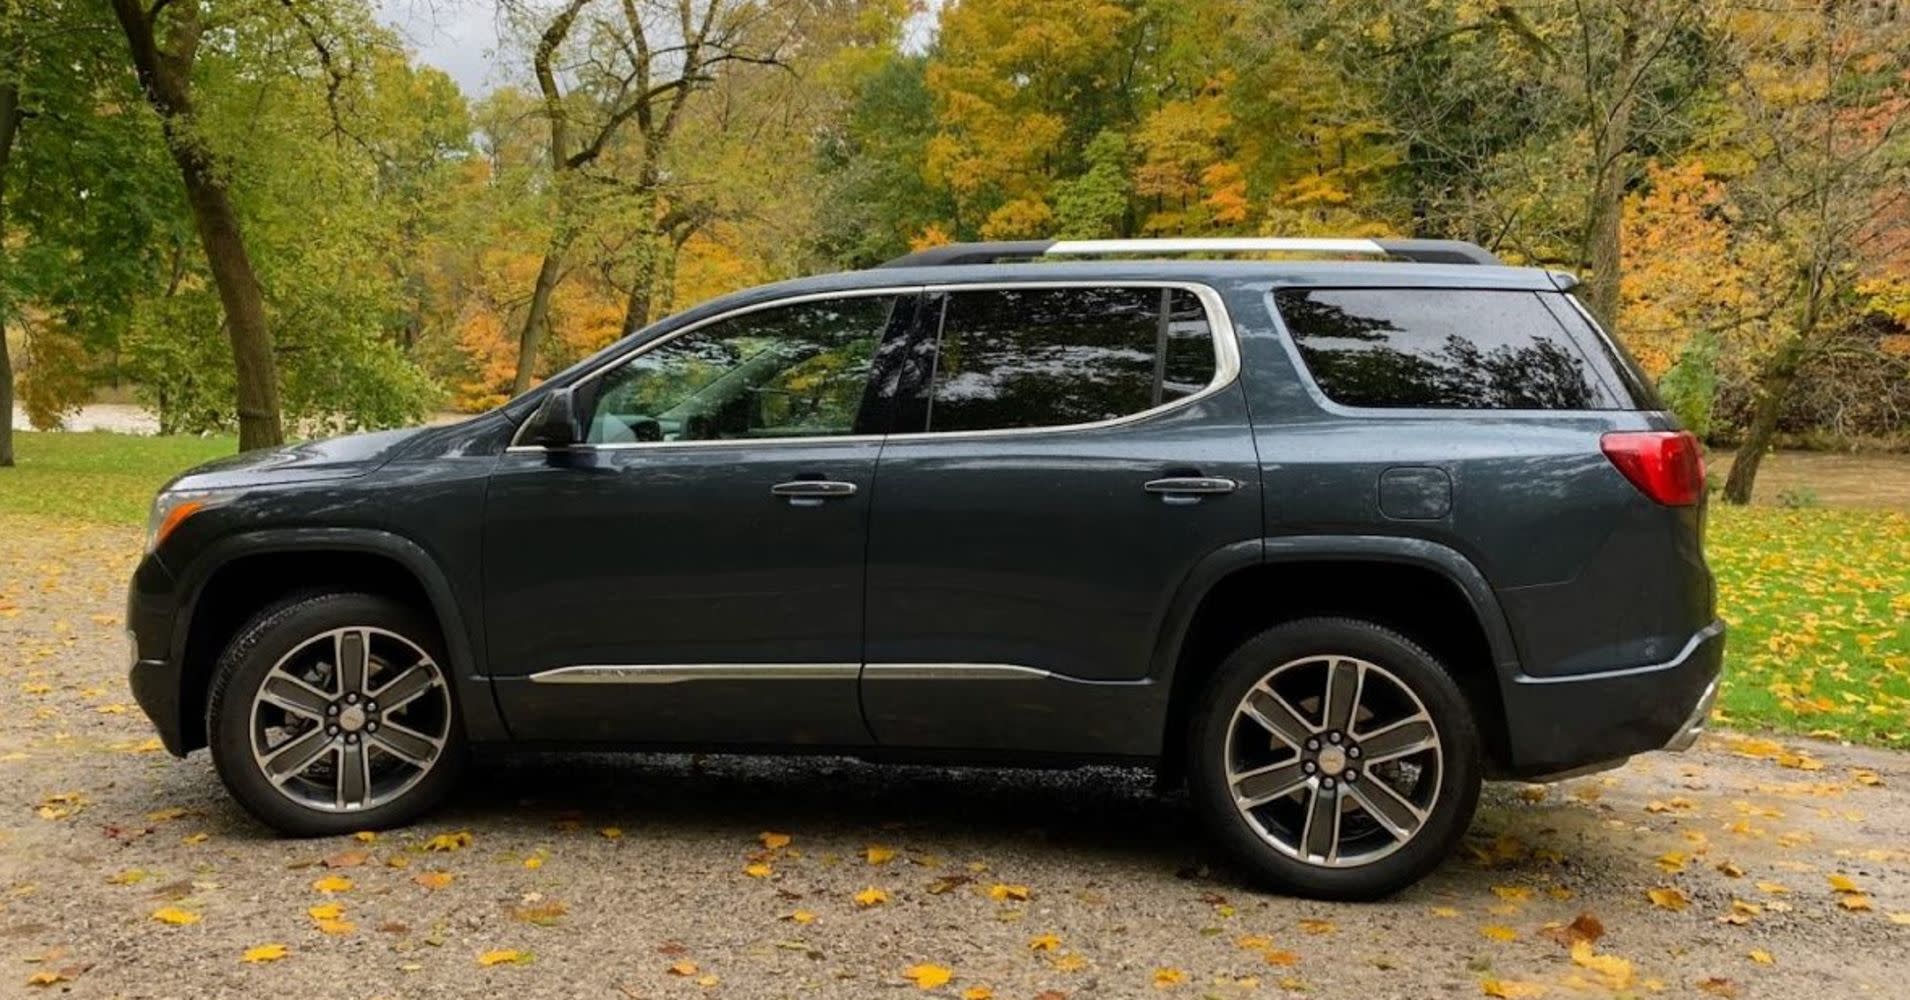 The 2019 Gmc Acadia Denali Is Quieter And More Luxurious